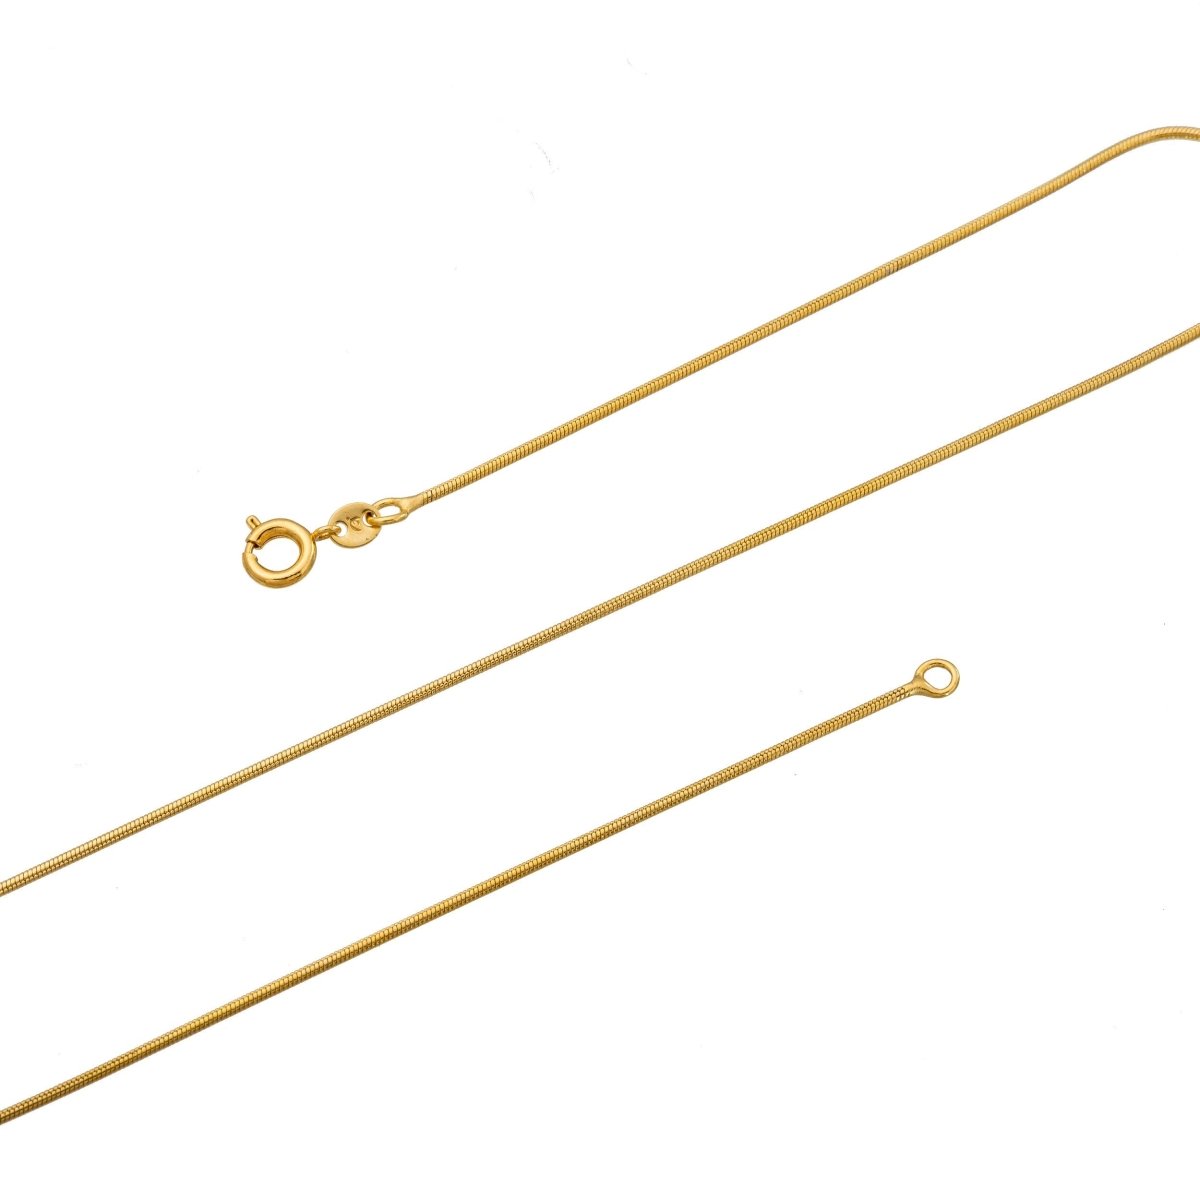 Dainty 1mm Omega Chain, 24K Gold Plated Omega Chain Necklace, 17.5 Inches Omega Necklace w/ Spring Rings | CN-173 Clearance Pricing - DLUXCA